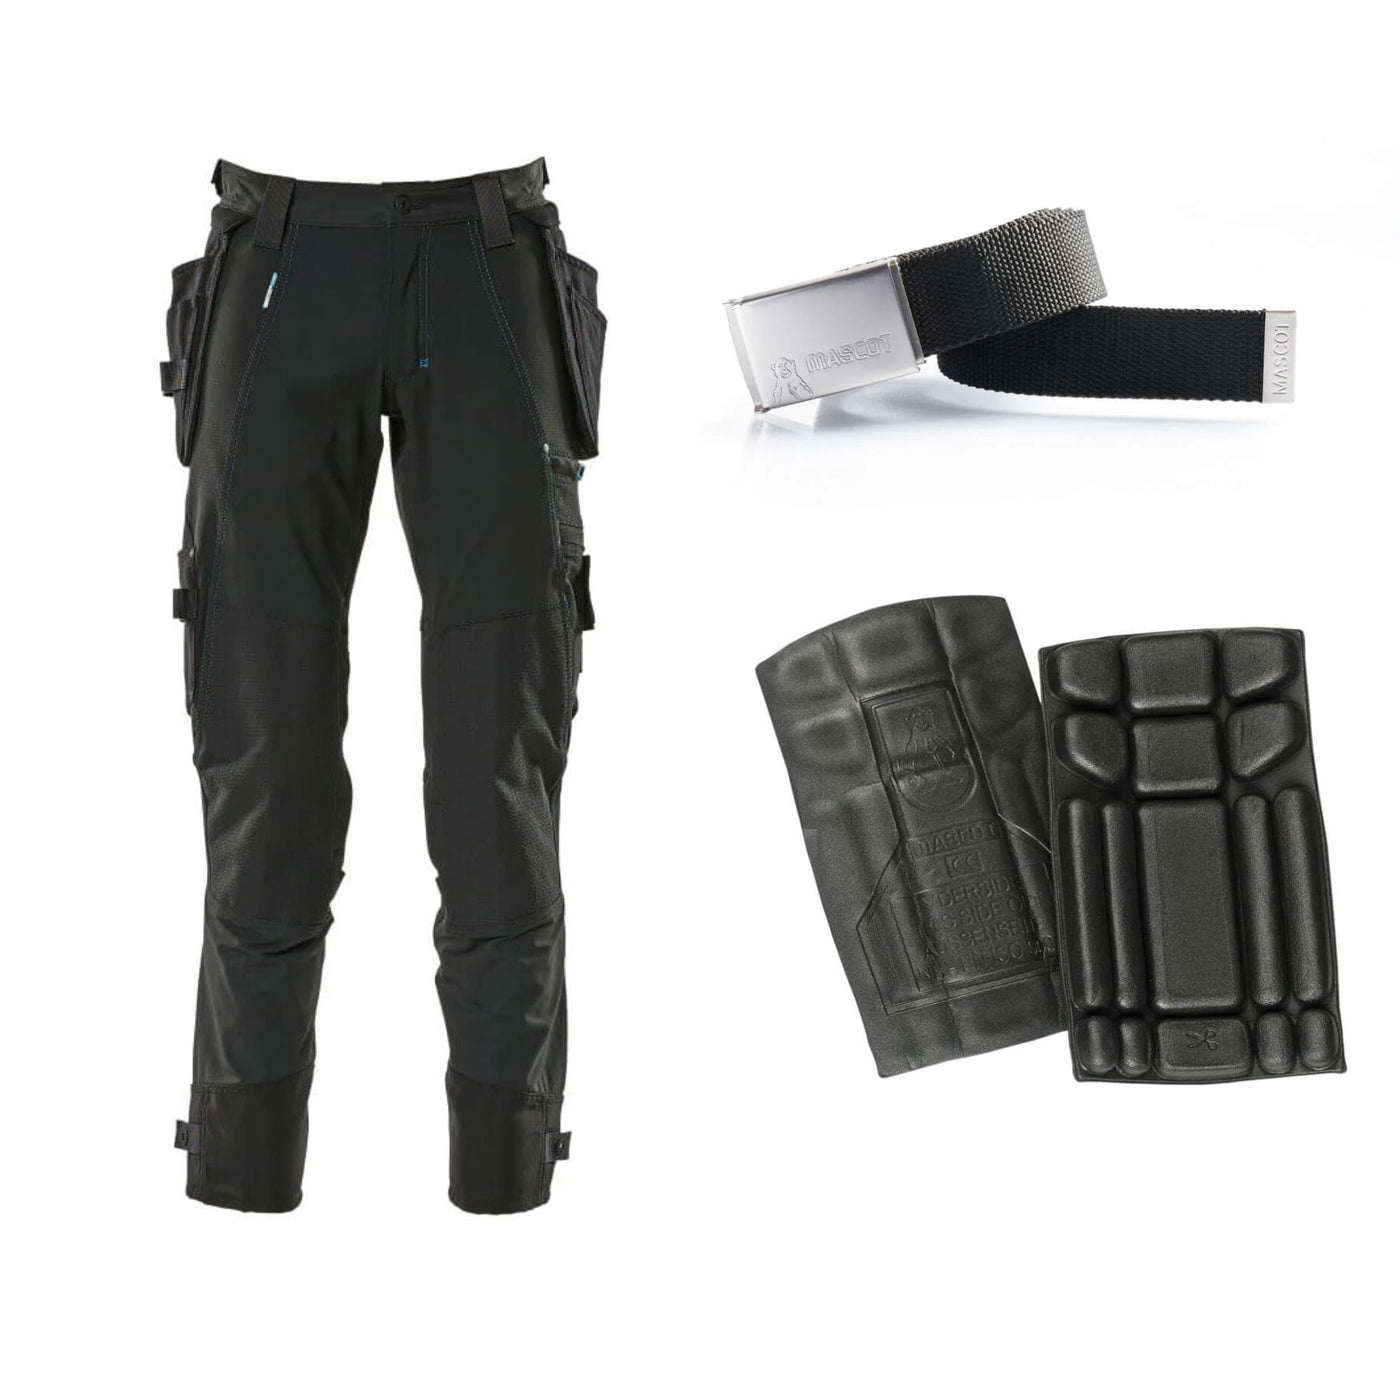 Mascot Special Offer 17031-311 Advanced Trousers Pack - Stretch Trousers + Belt + Knee Pads